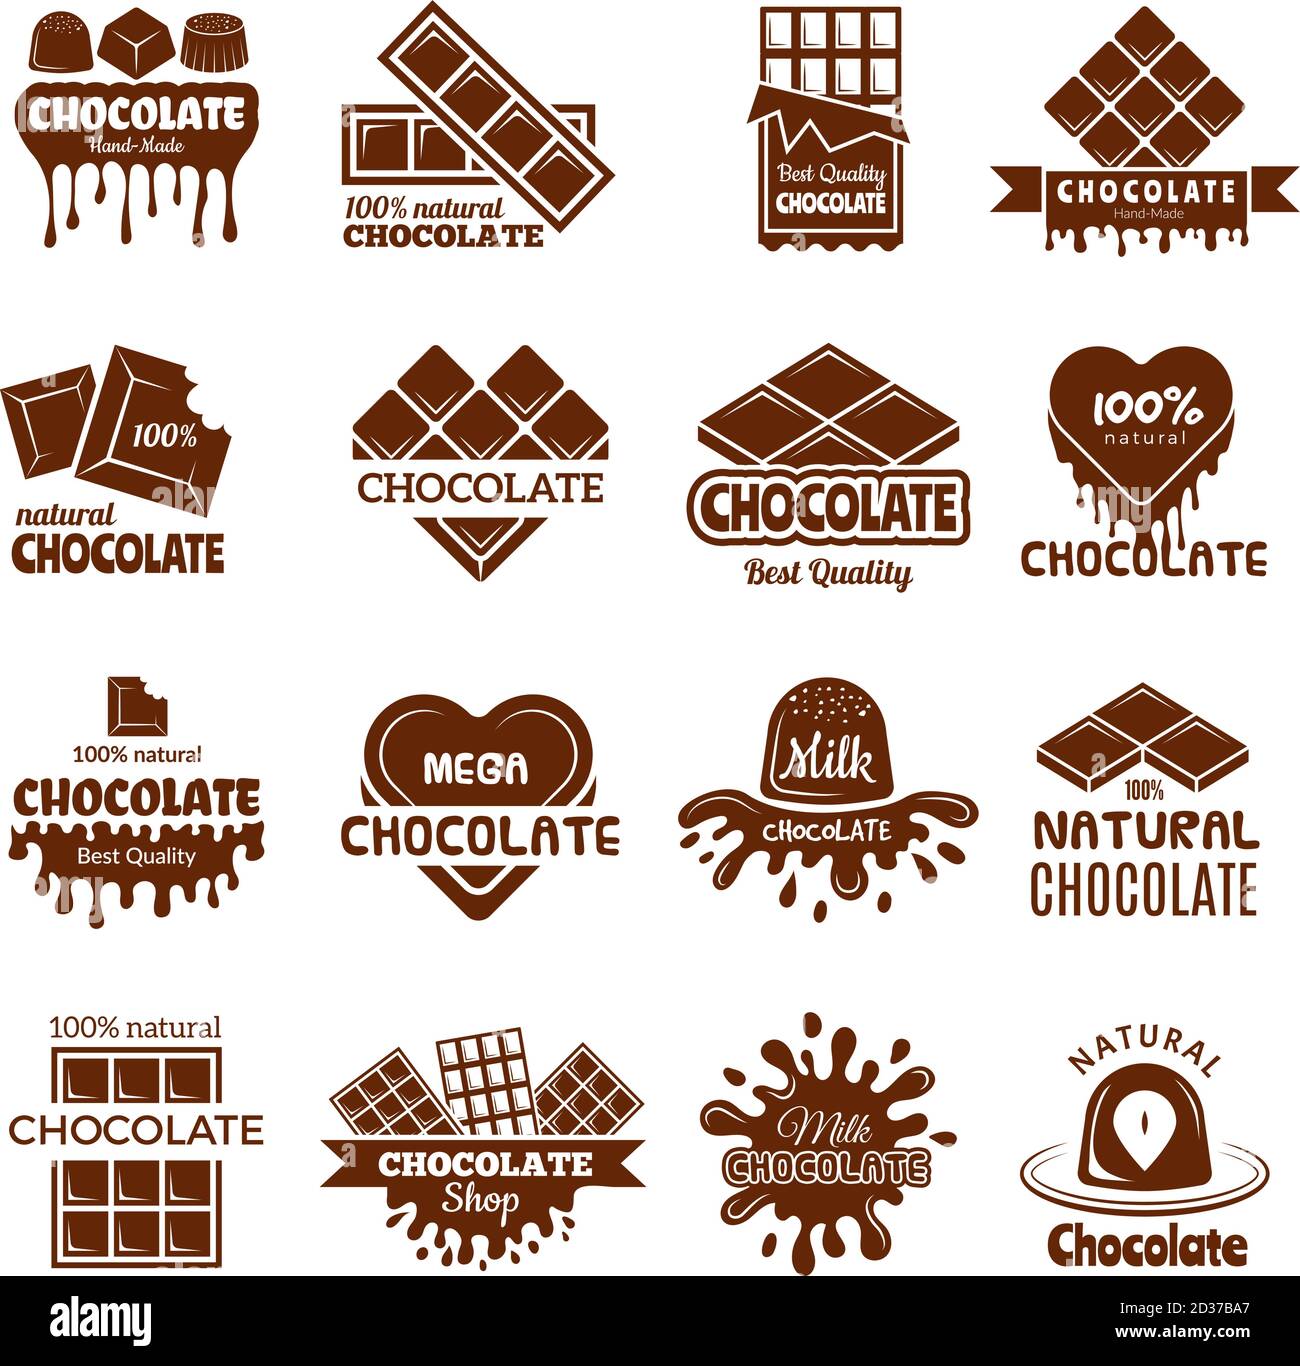 Chocolate badges. Logo design for sweets cacao beans desserts cooking symbols vector concepts Stock Vector